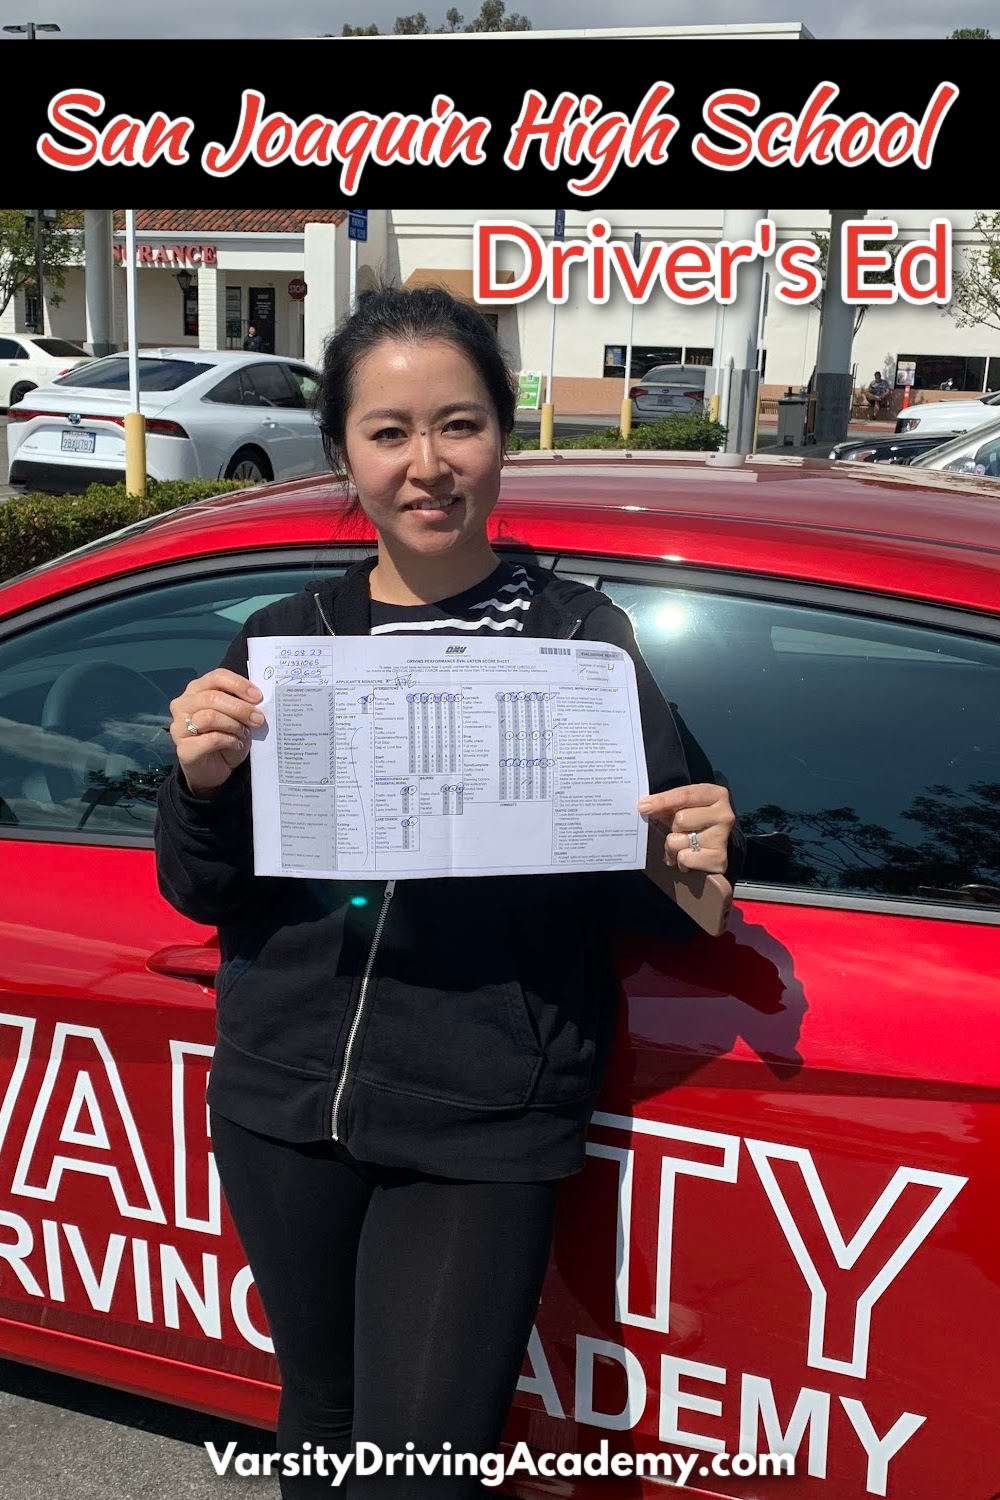 Students can turn to Varsity Driving Academy for the best San Joaquin High School driver's education and behind the wheel training.